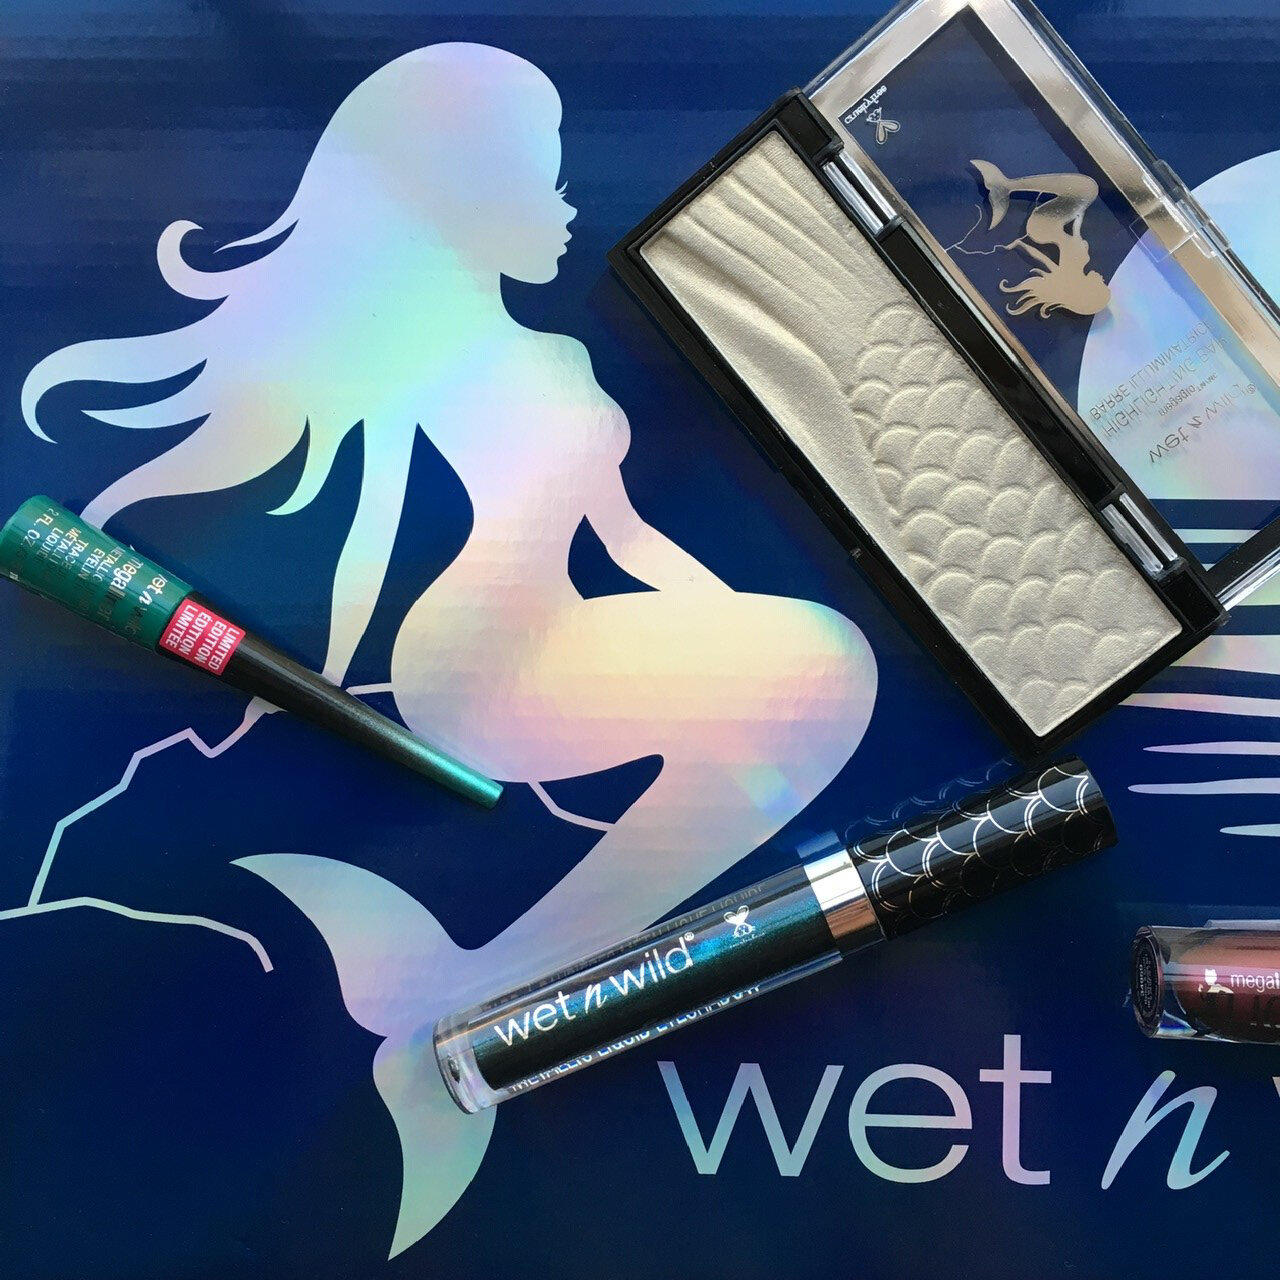   Wet ‘n’ Wild Mermaid Collection Box Fall 2017  